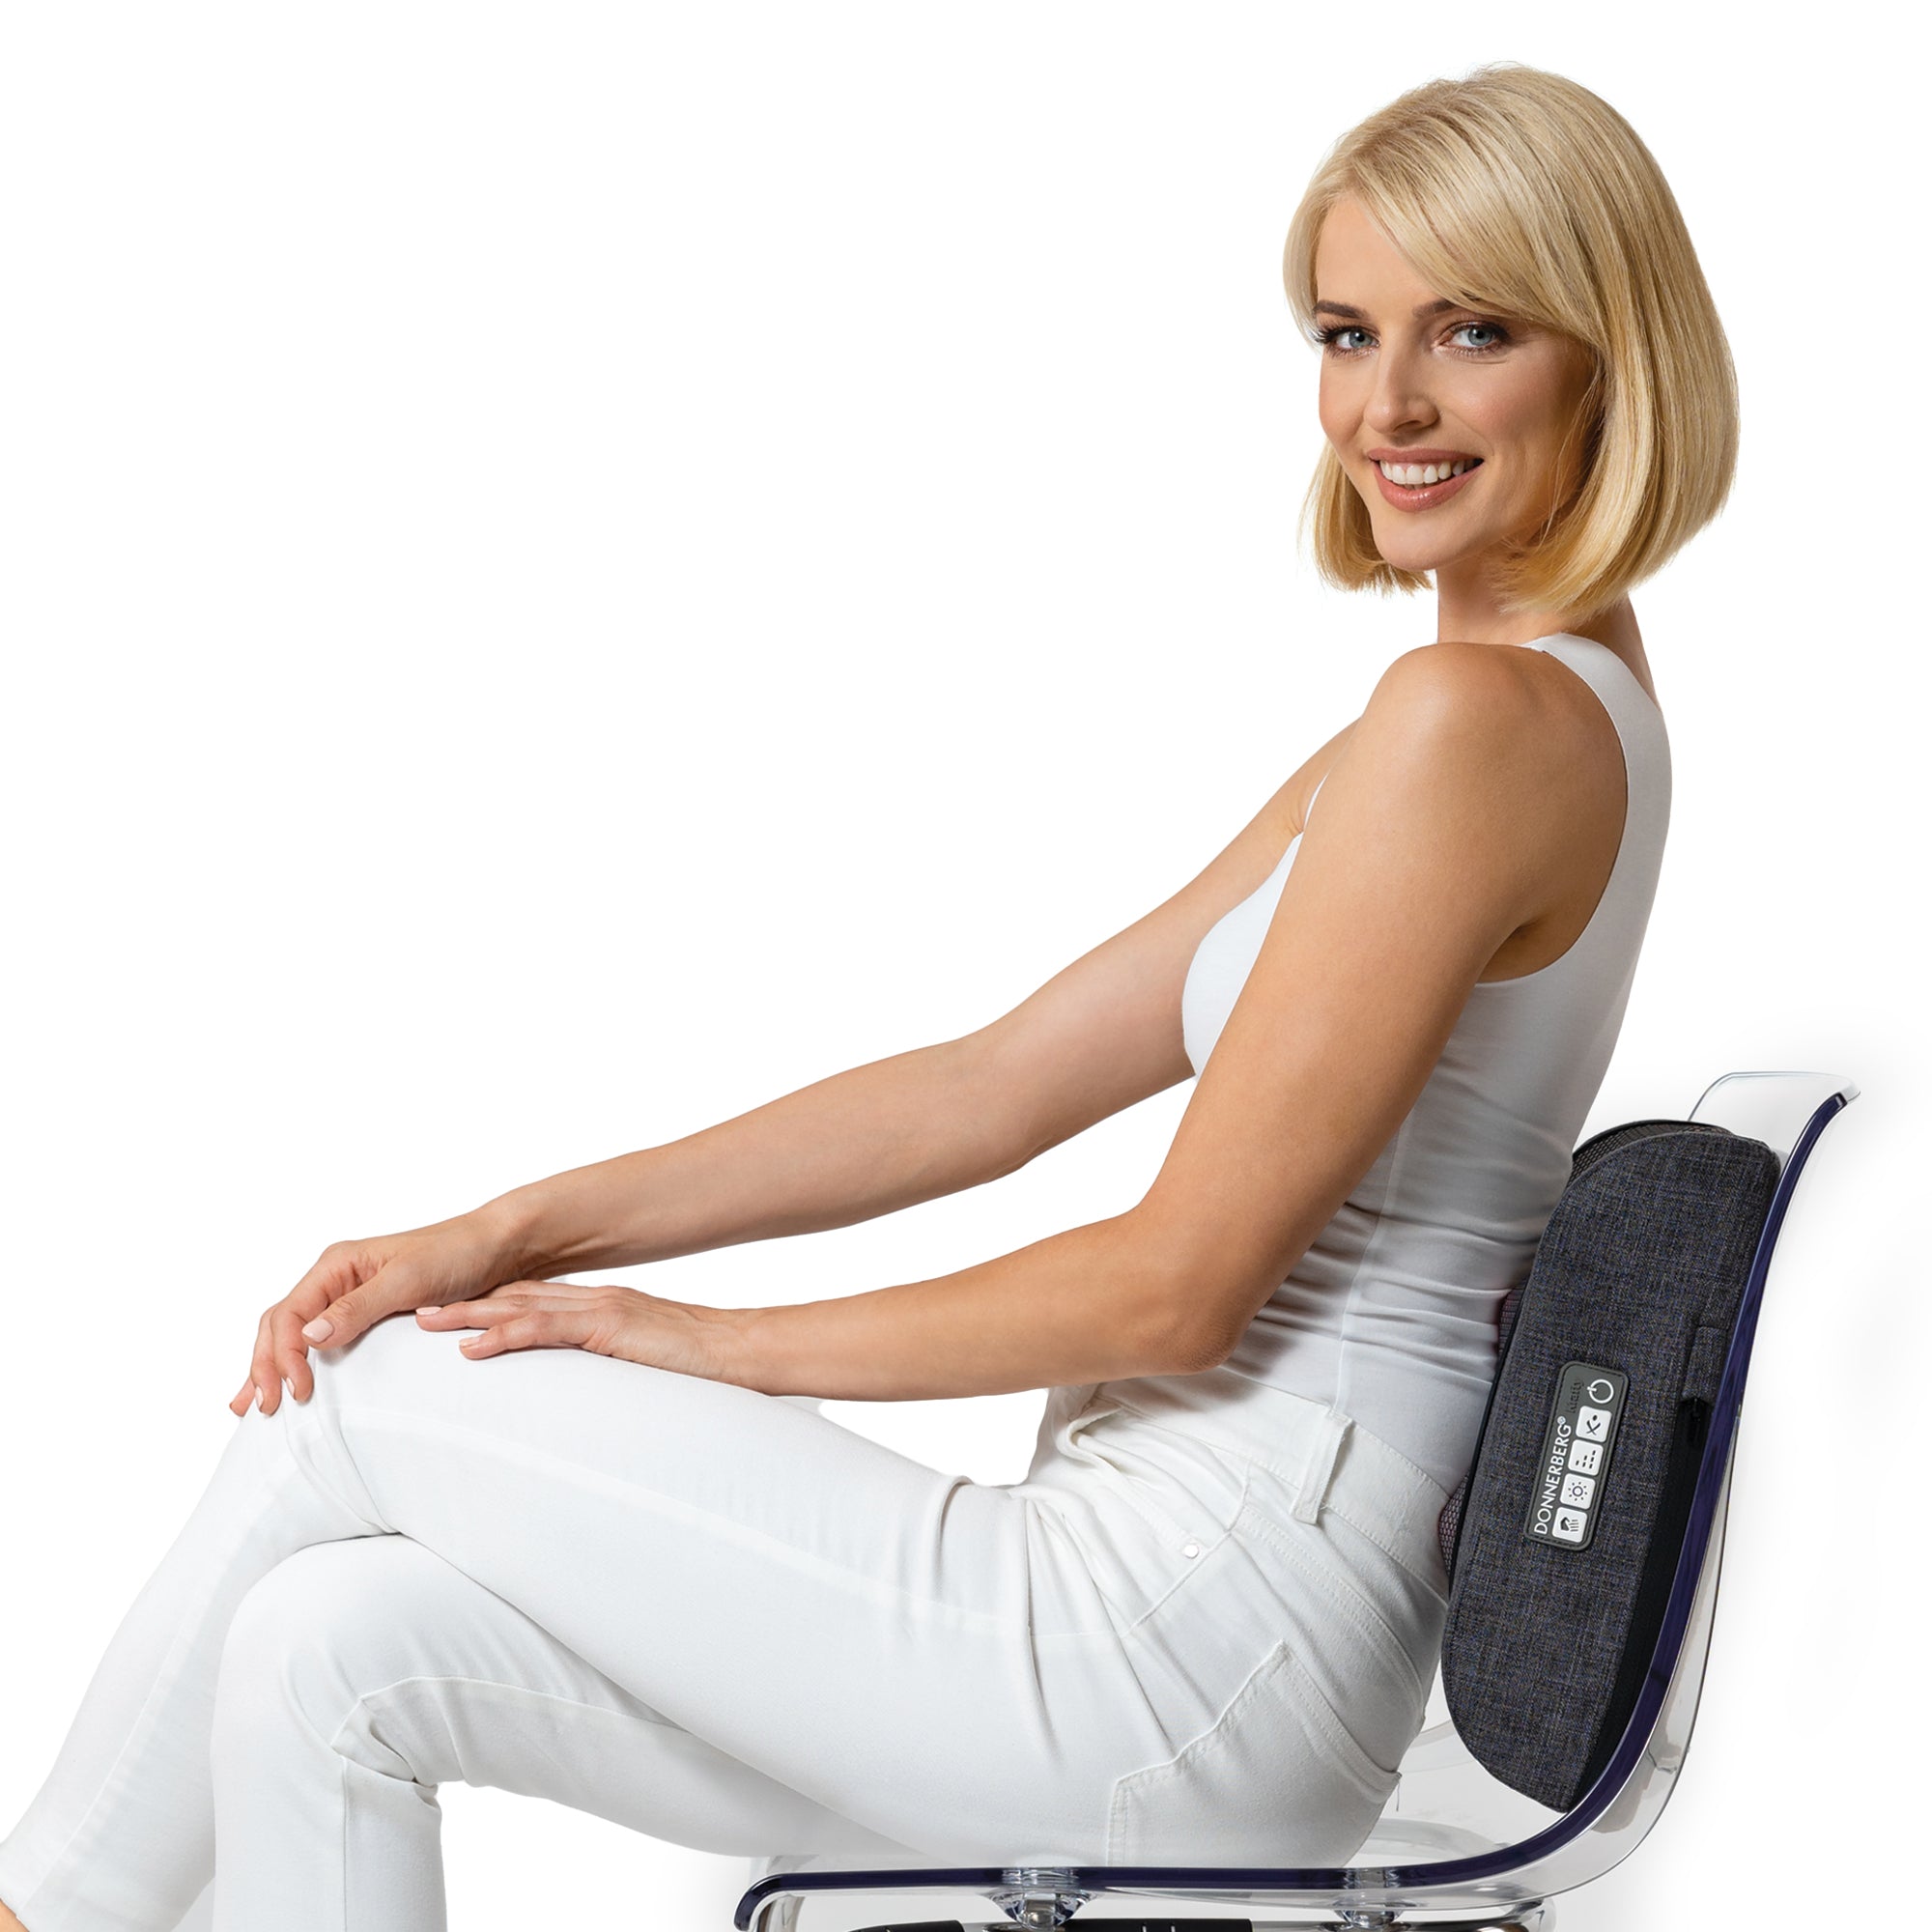 Woman sitting on chair and using back massager